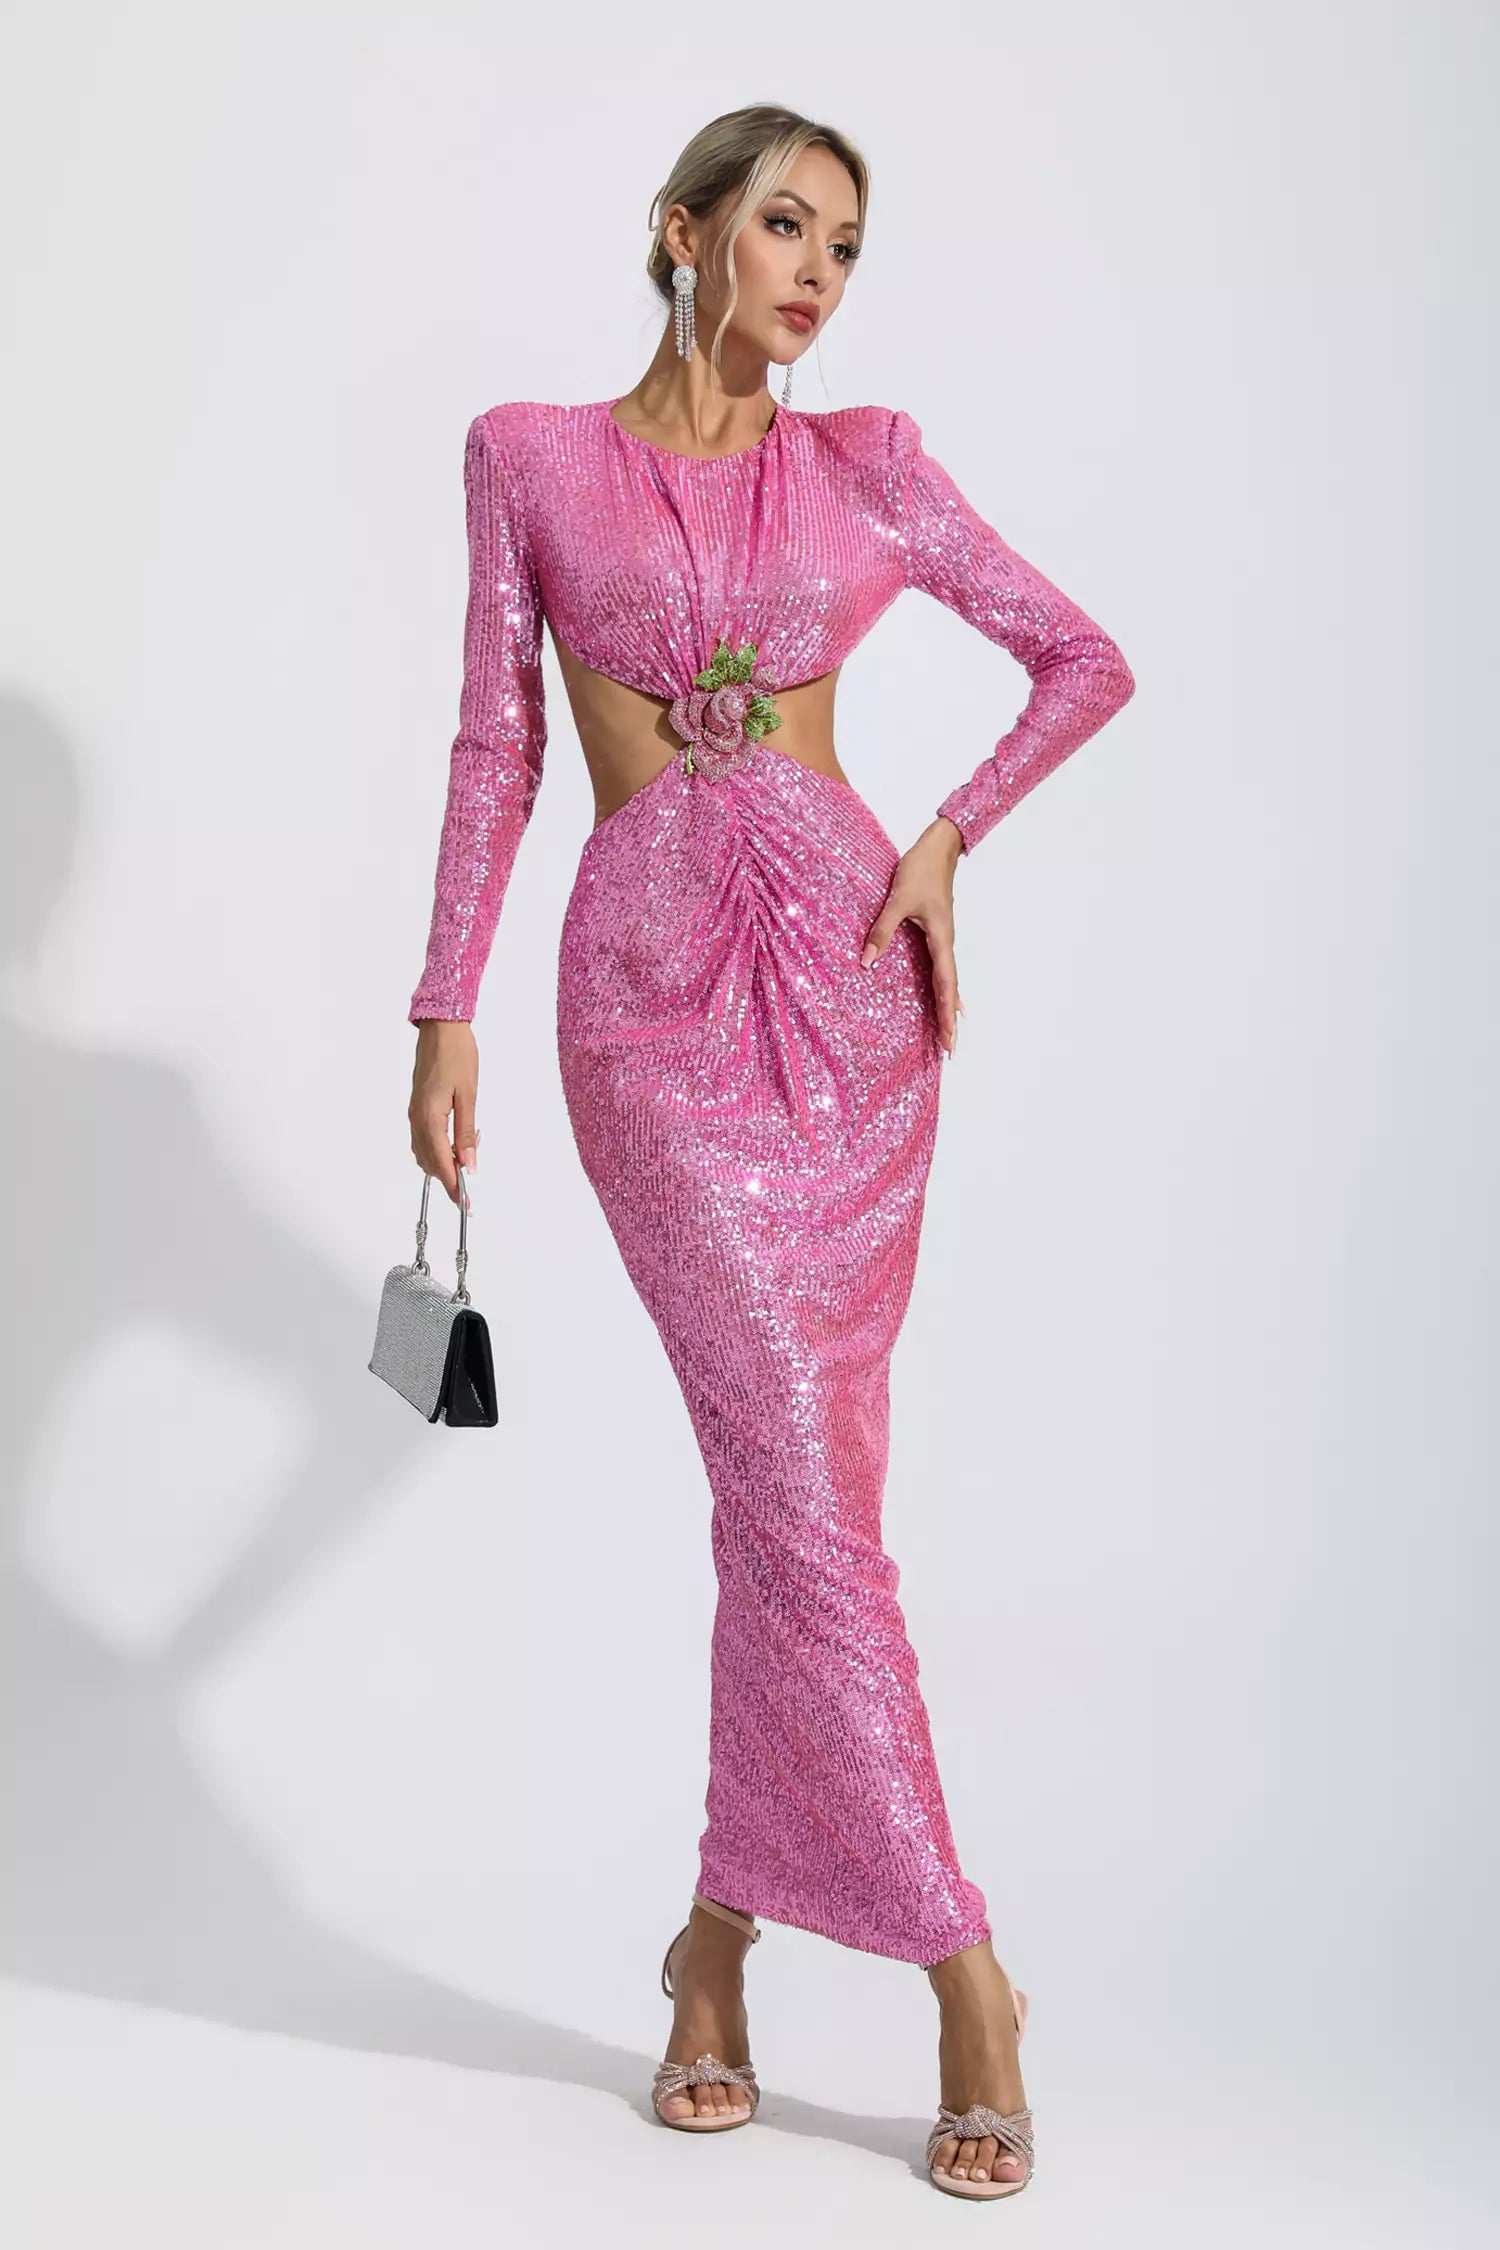 Ana Pink Sequin Backless Dress